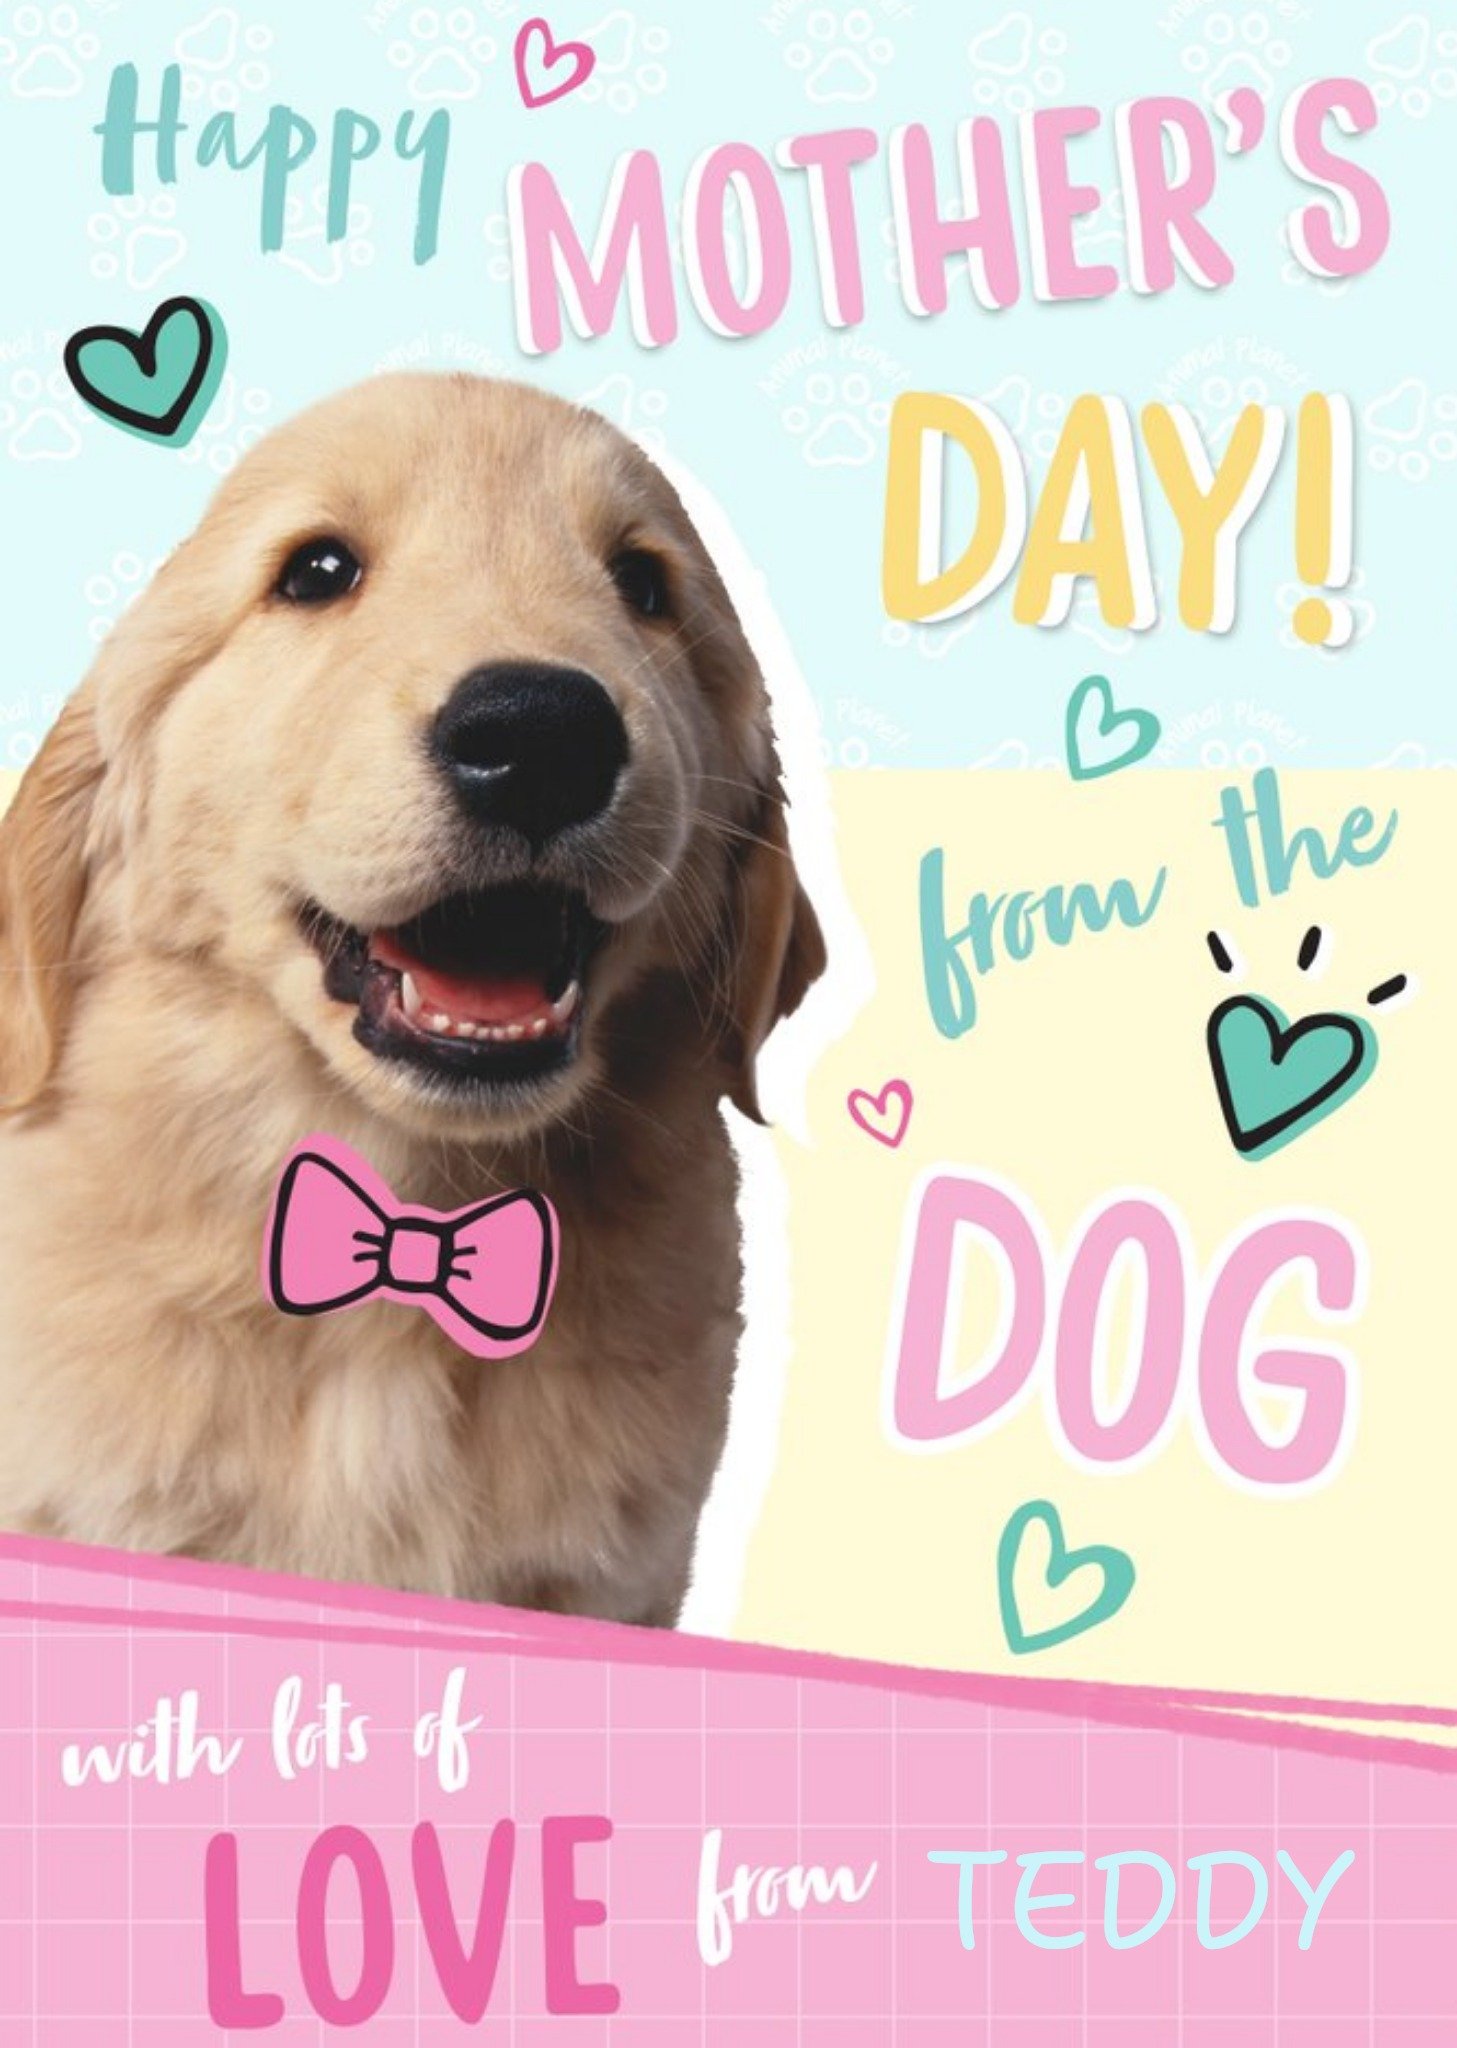 Moonpig Animal Planet Happy Mother's Day From The Dog Cute Card Ecard